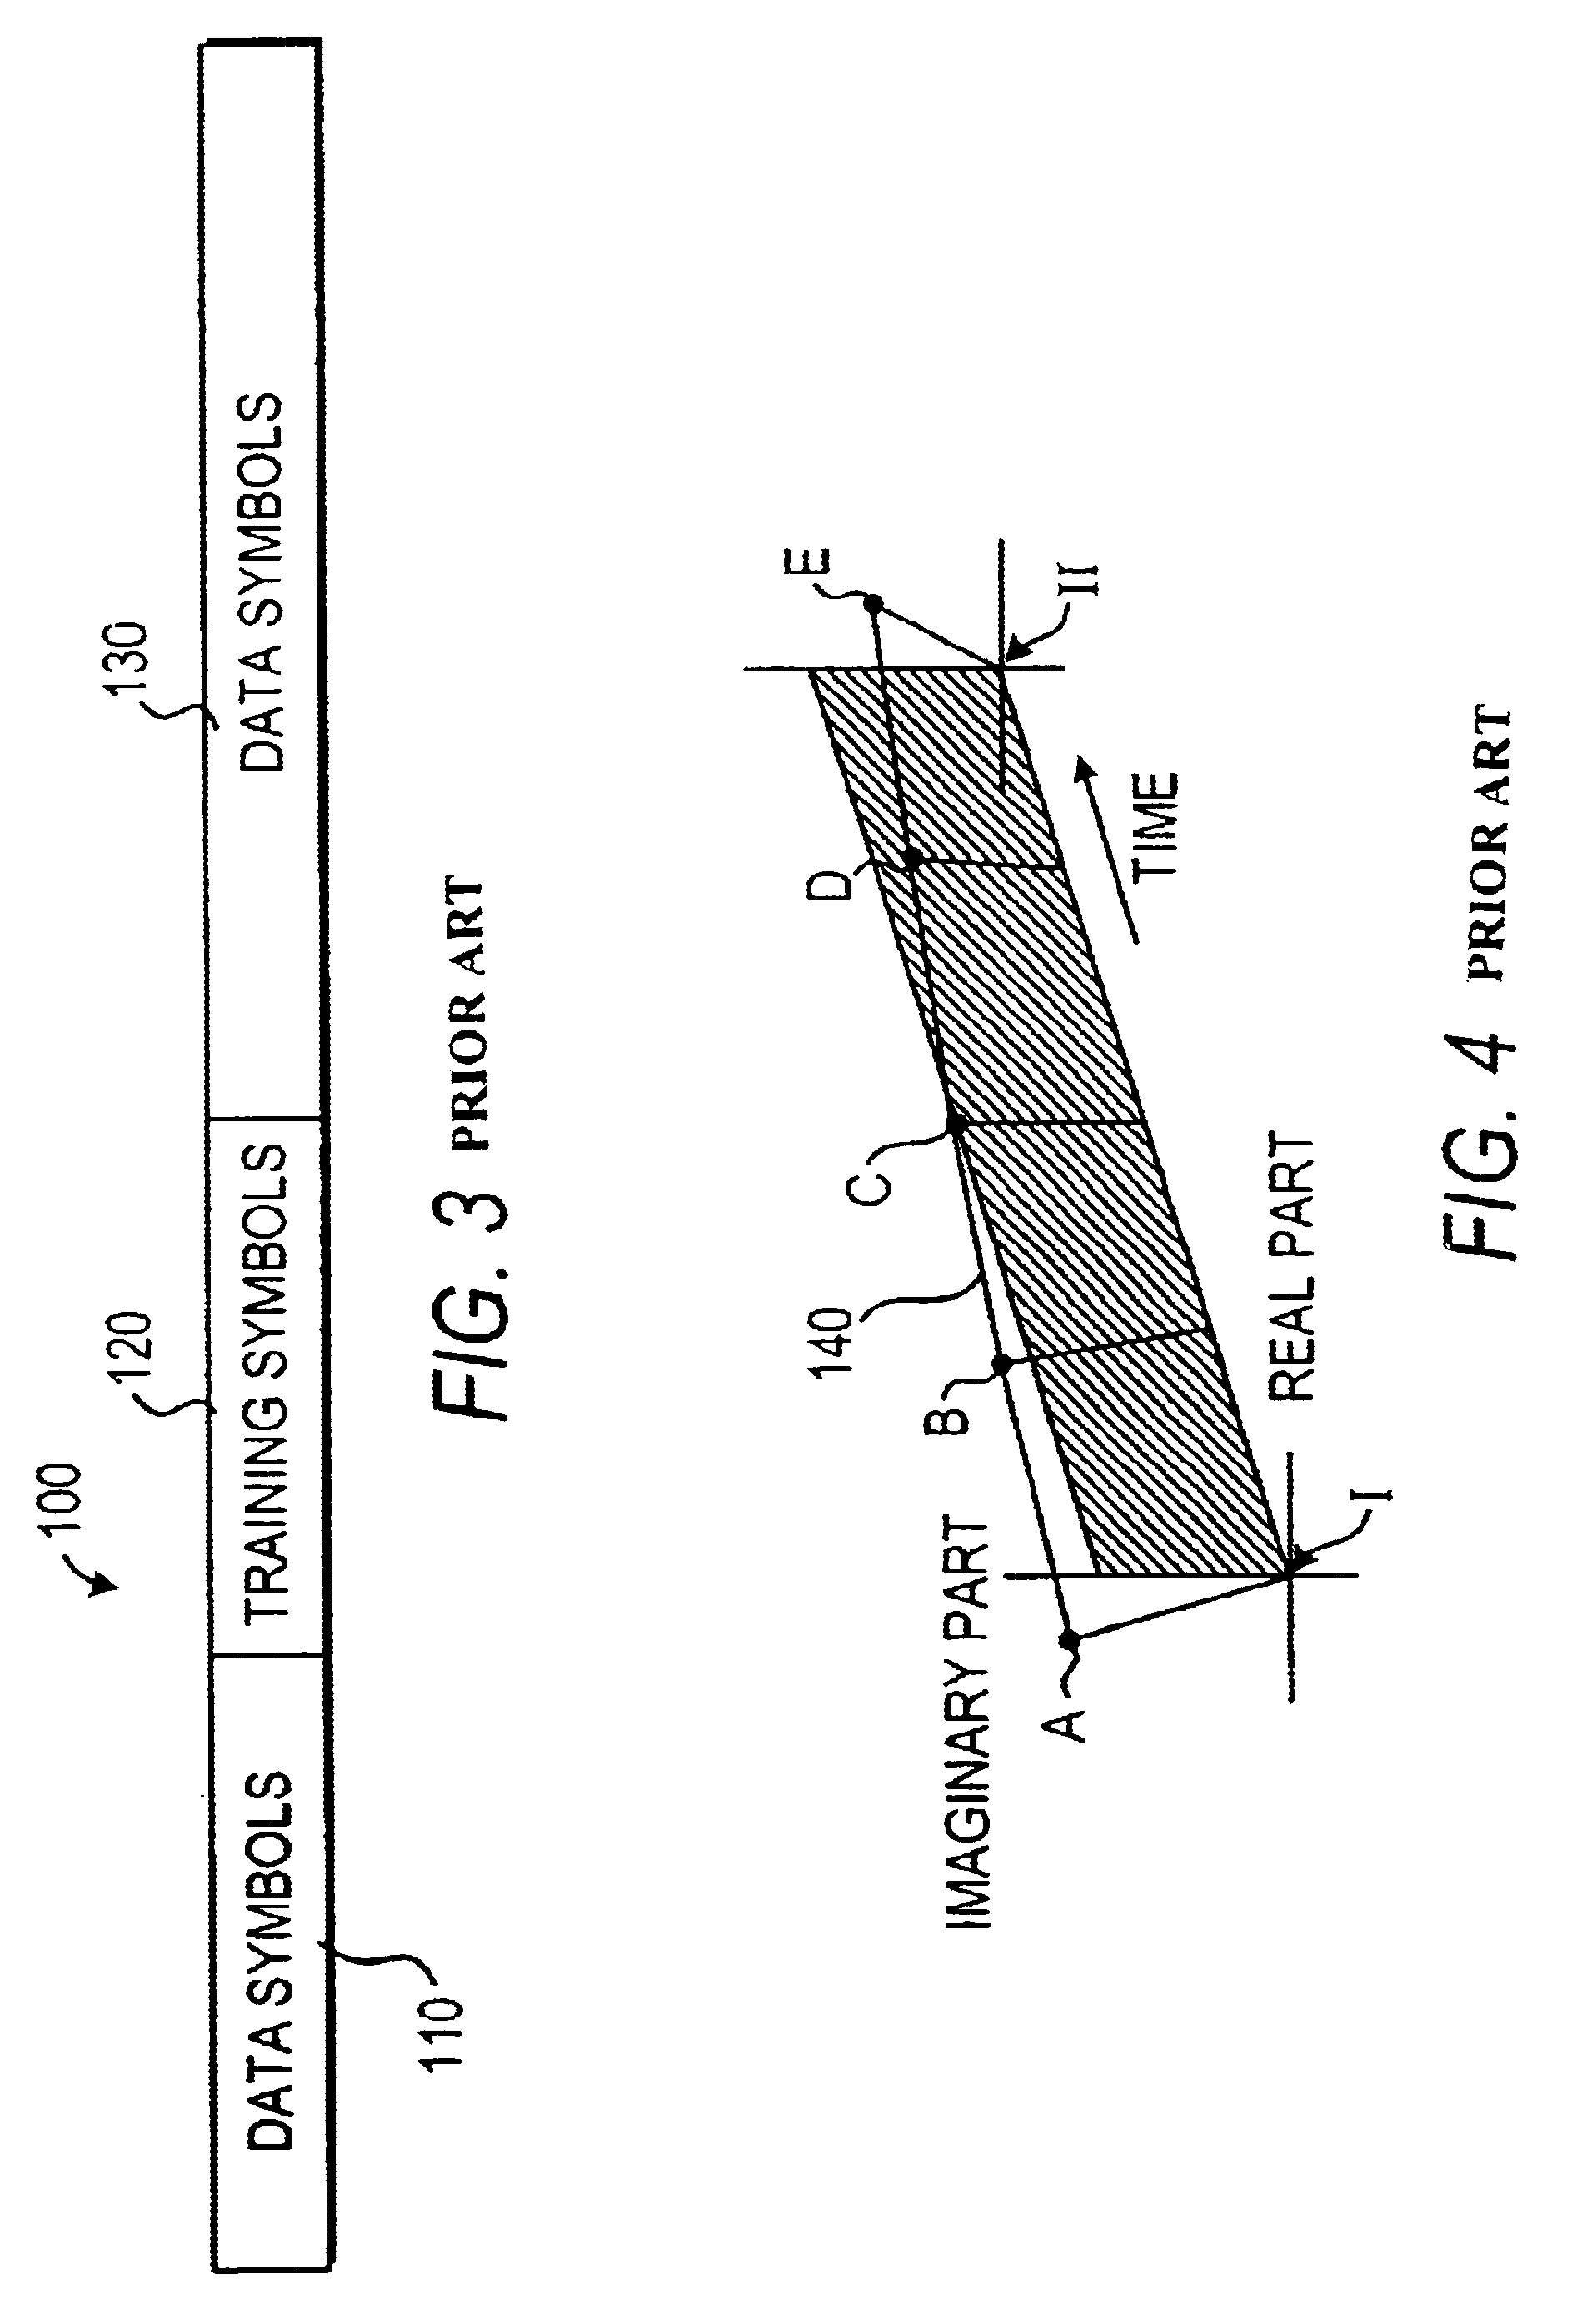 Method for automatic frequency control